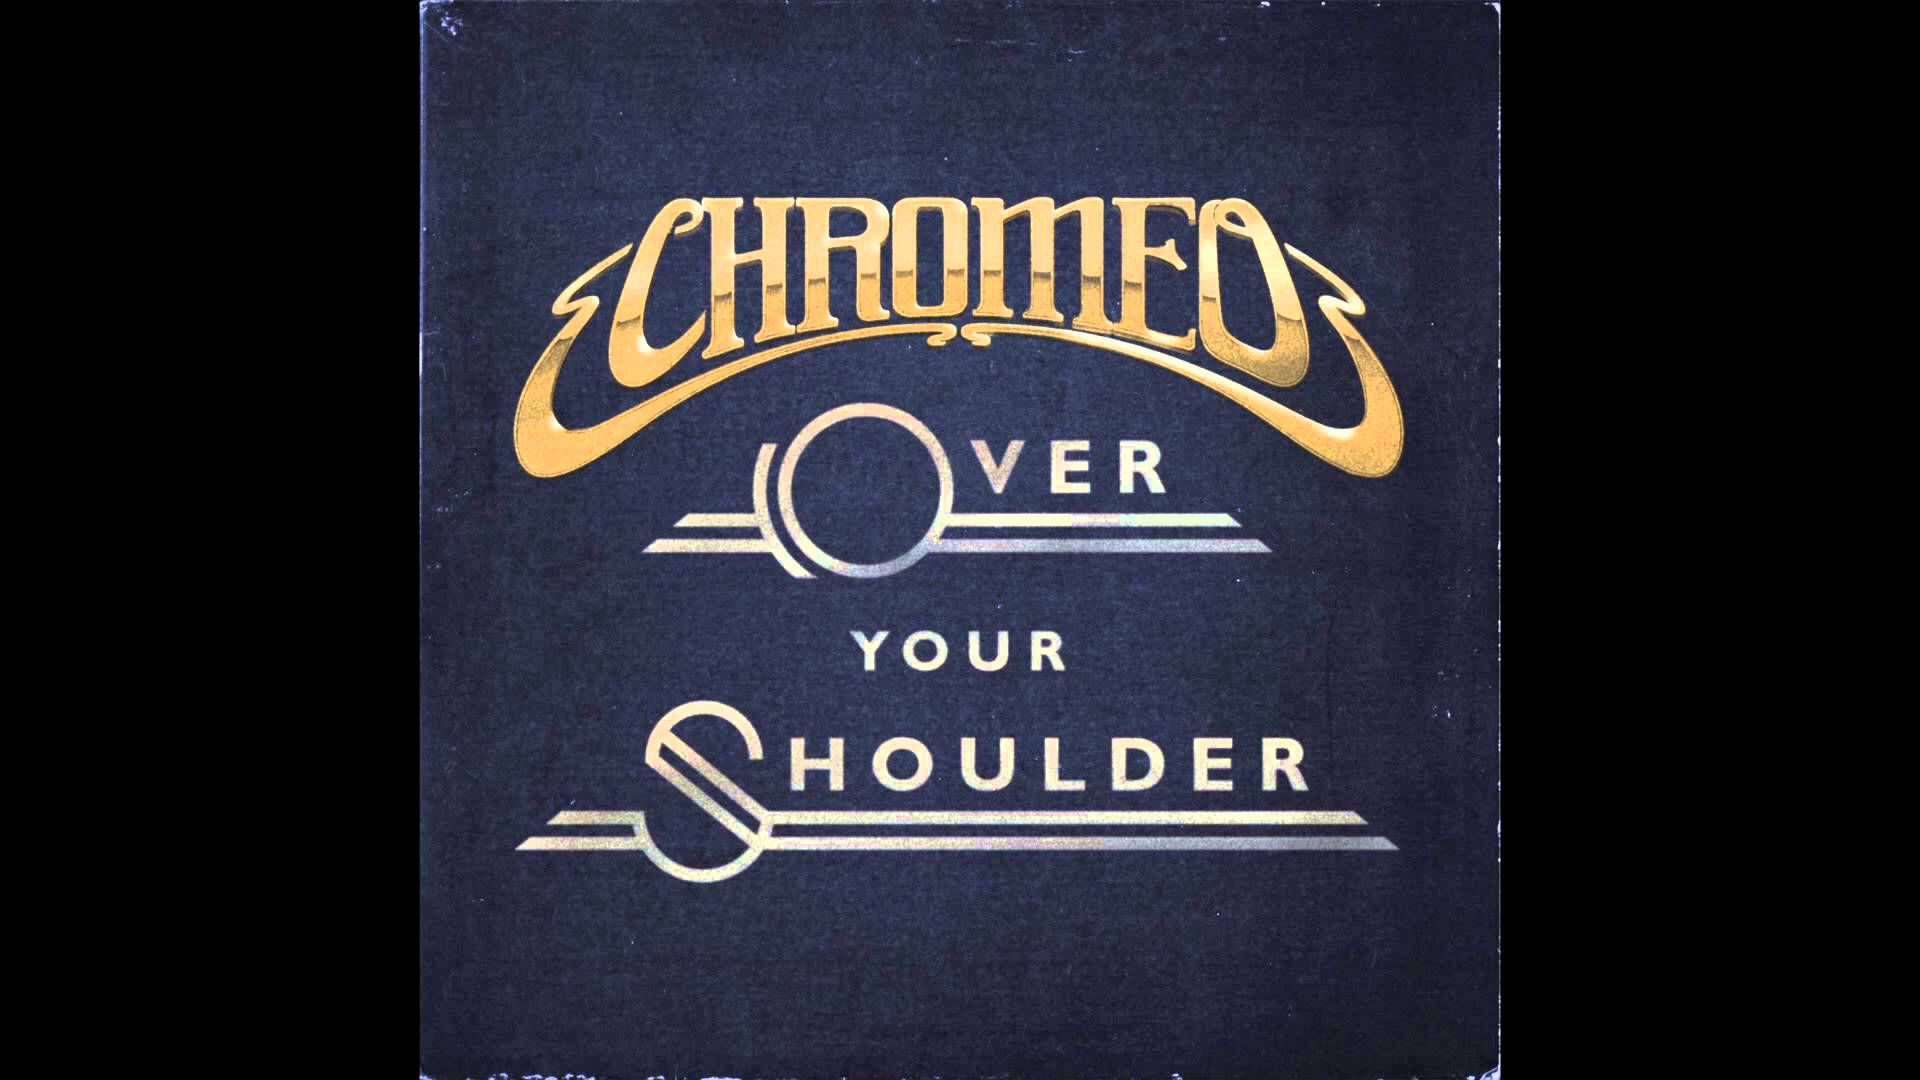 Chromeo - Over Your Shoulder [Official Audio] - YouTube